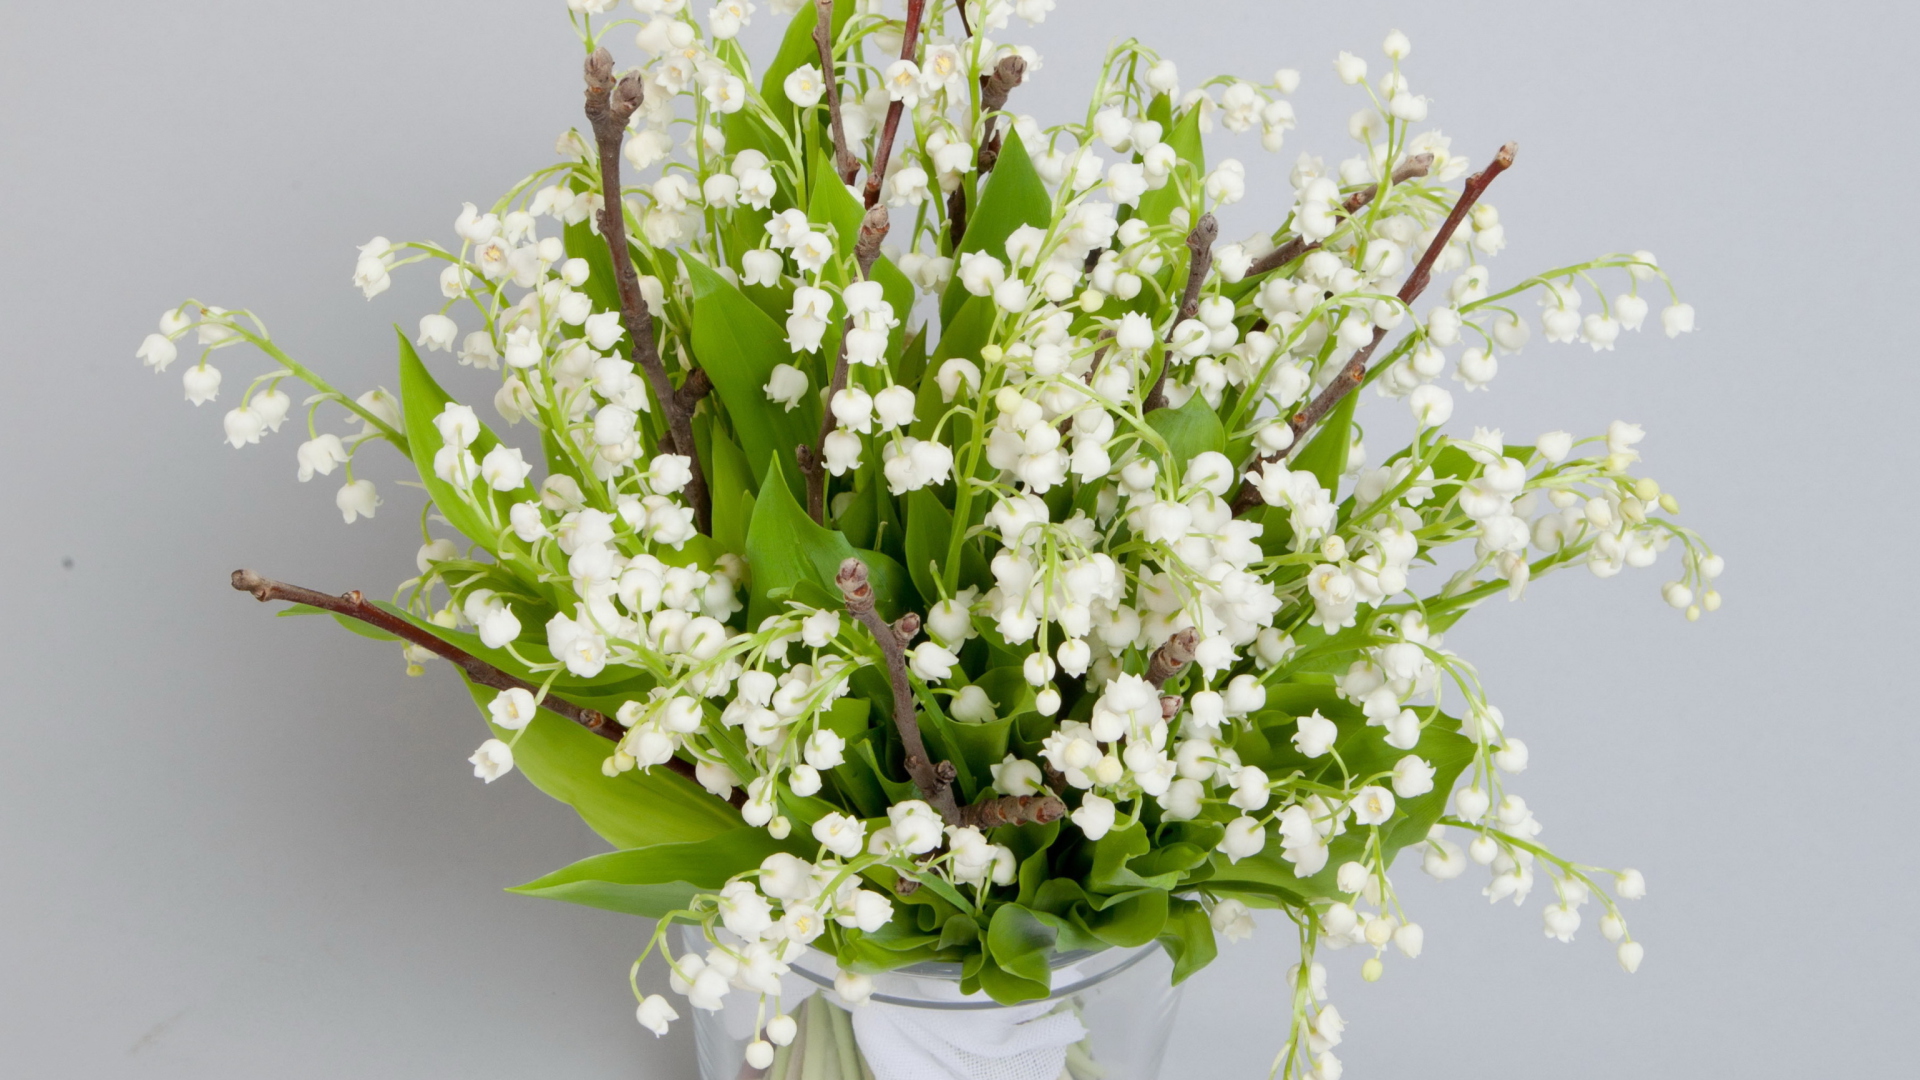 Lily Of The Valley Bouquet wallpaper 1920x1080